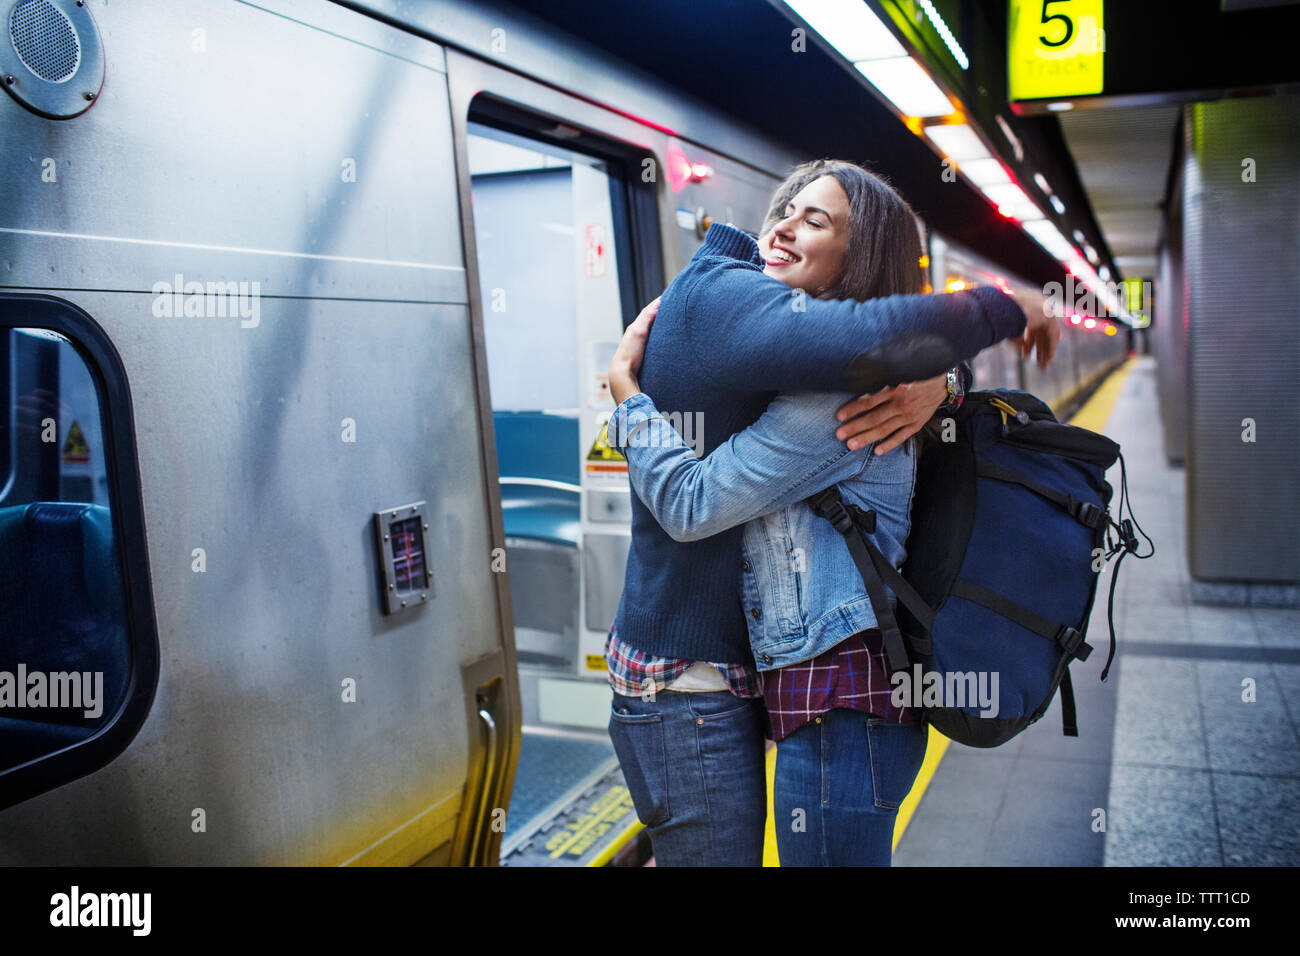 Loving couple embracing while standing at subway station by train Stock Photo